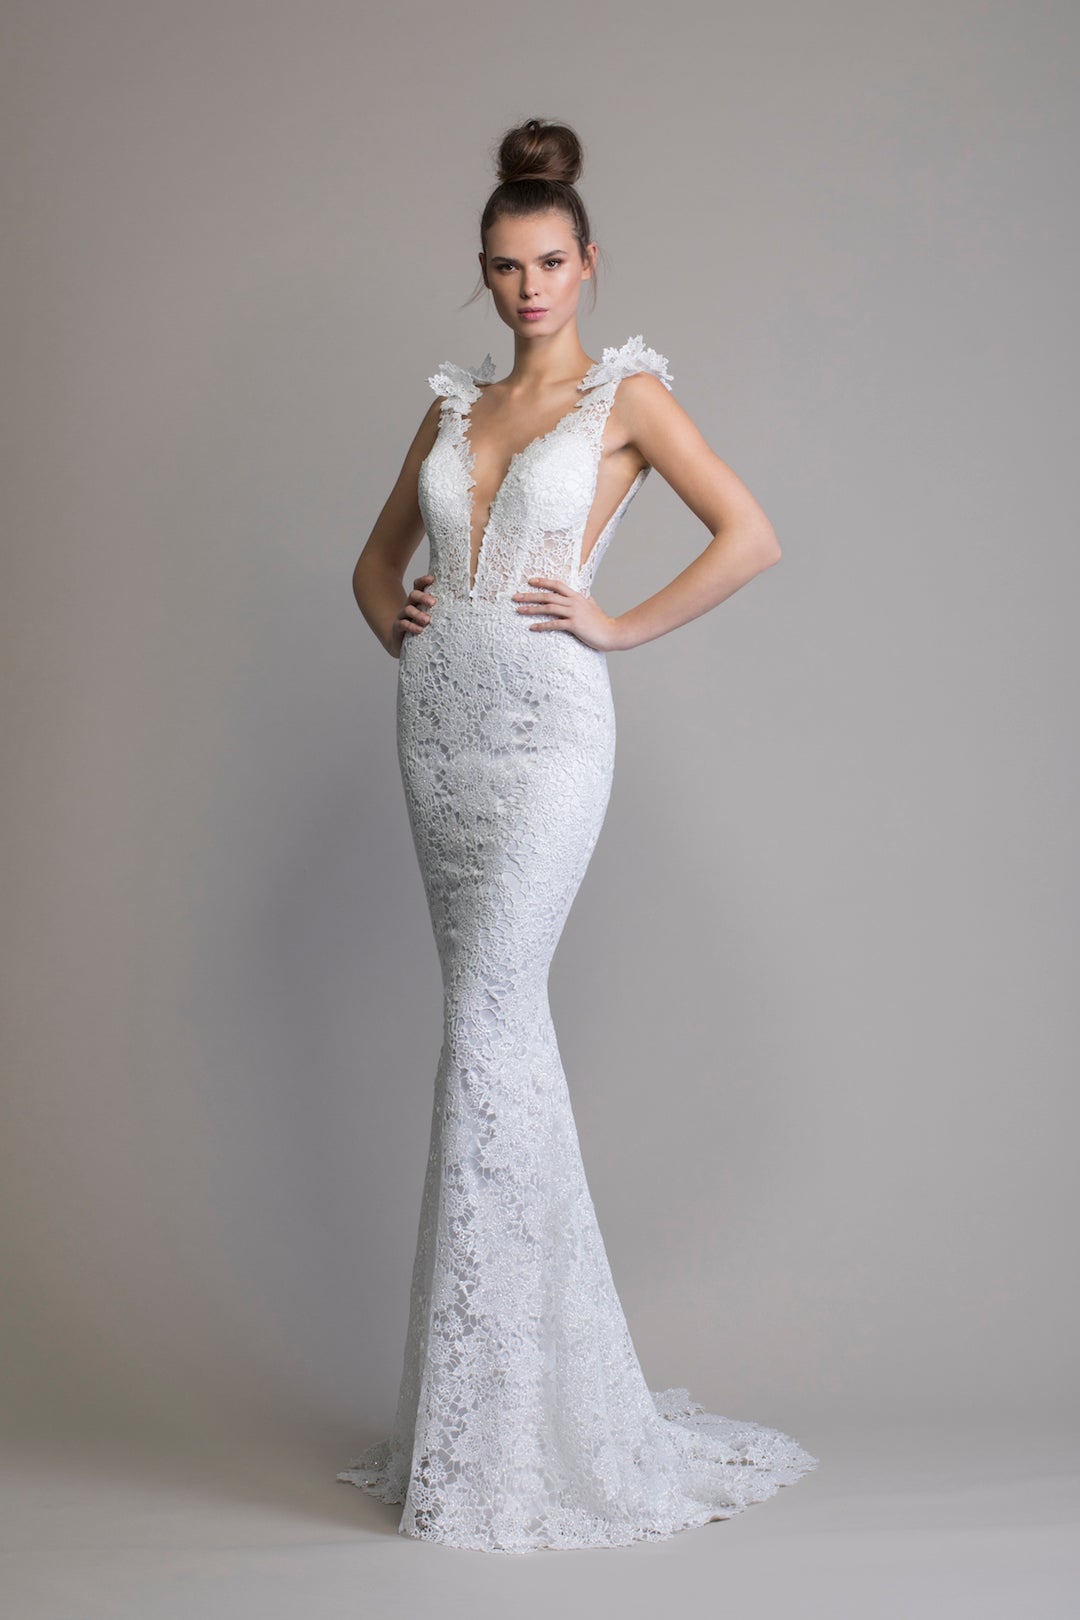 Pnina Tornai's new LOVE 2020 Collection is out! This is style 14760